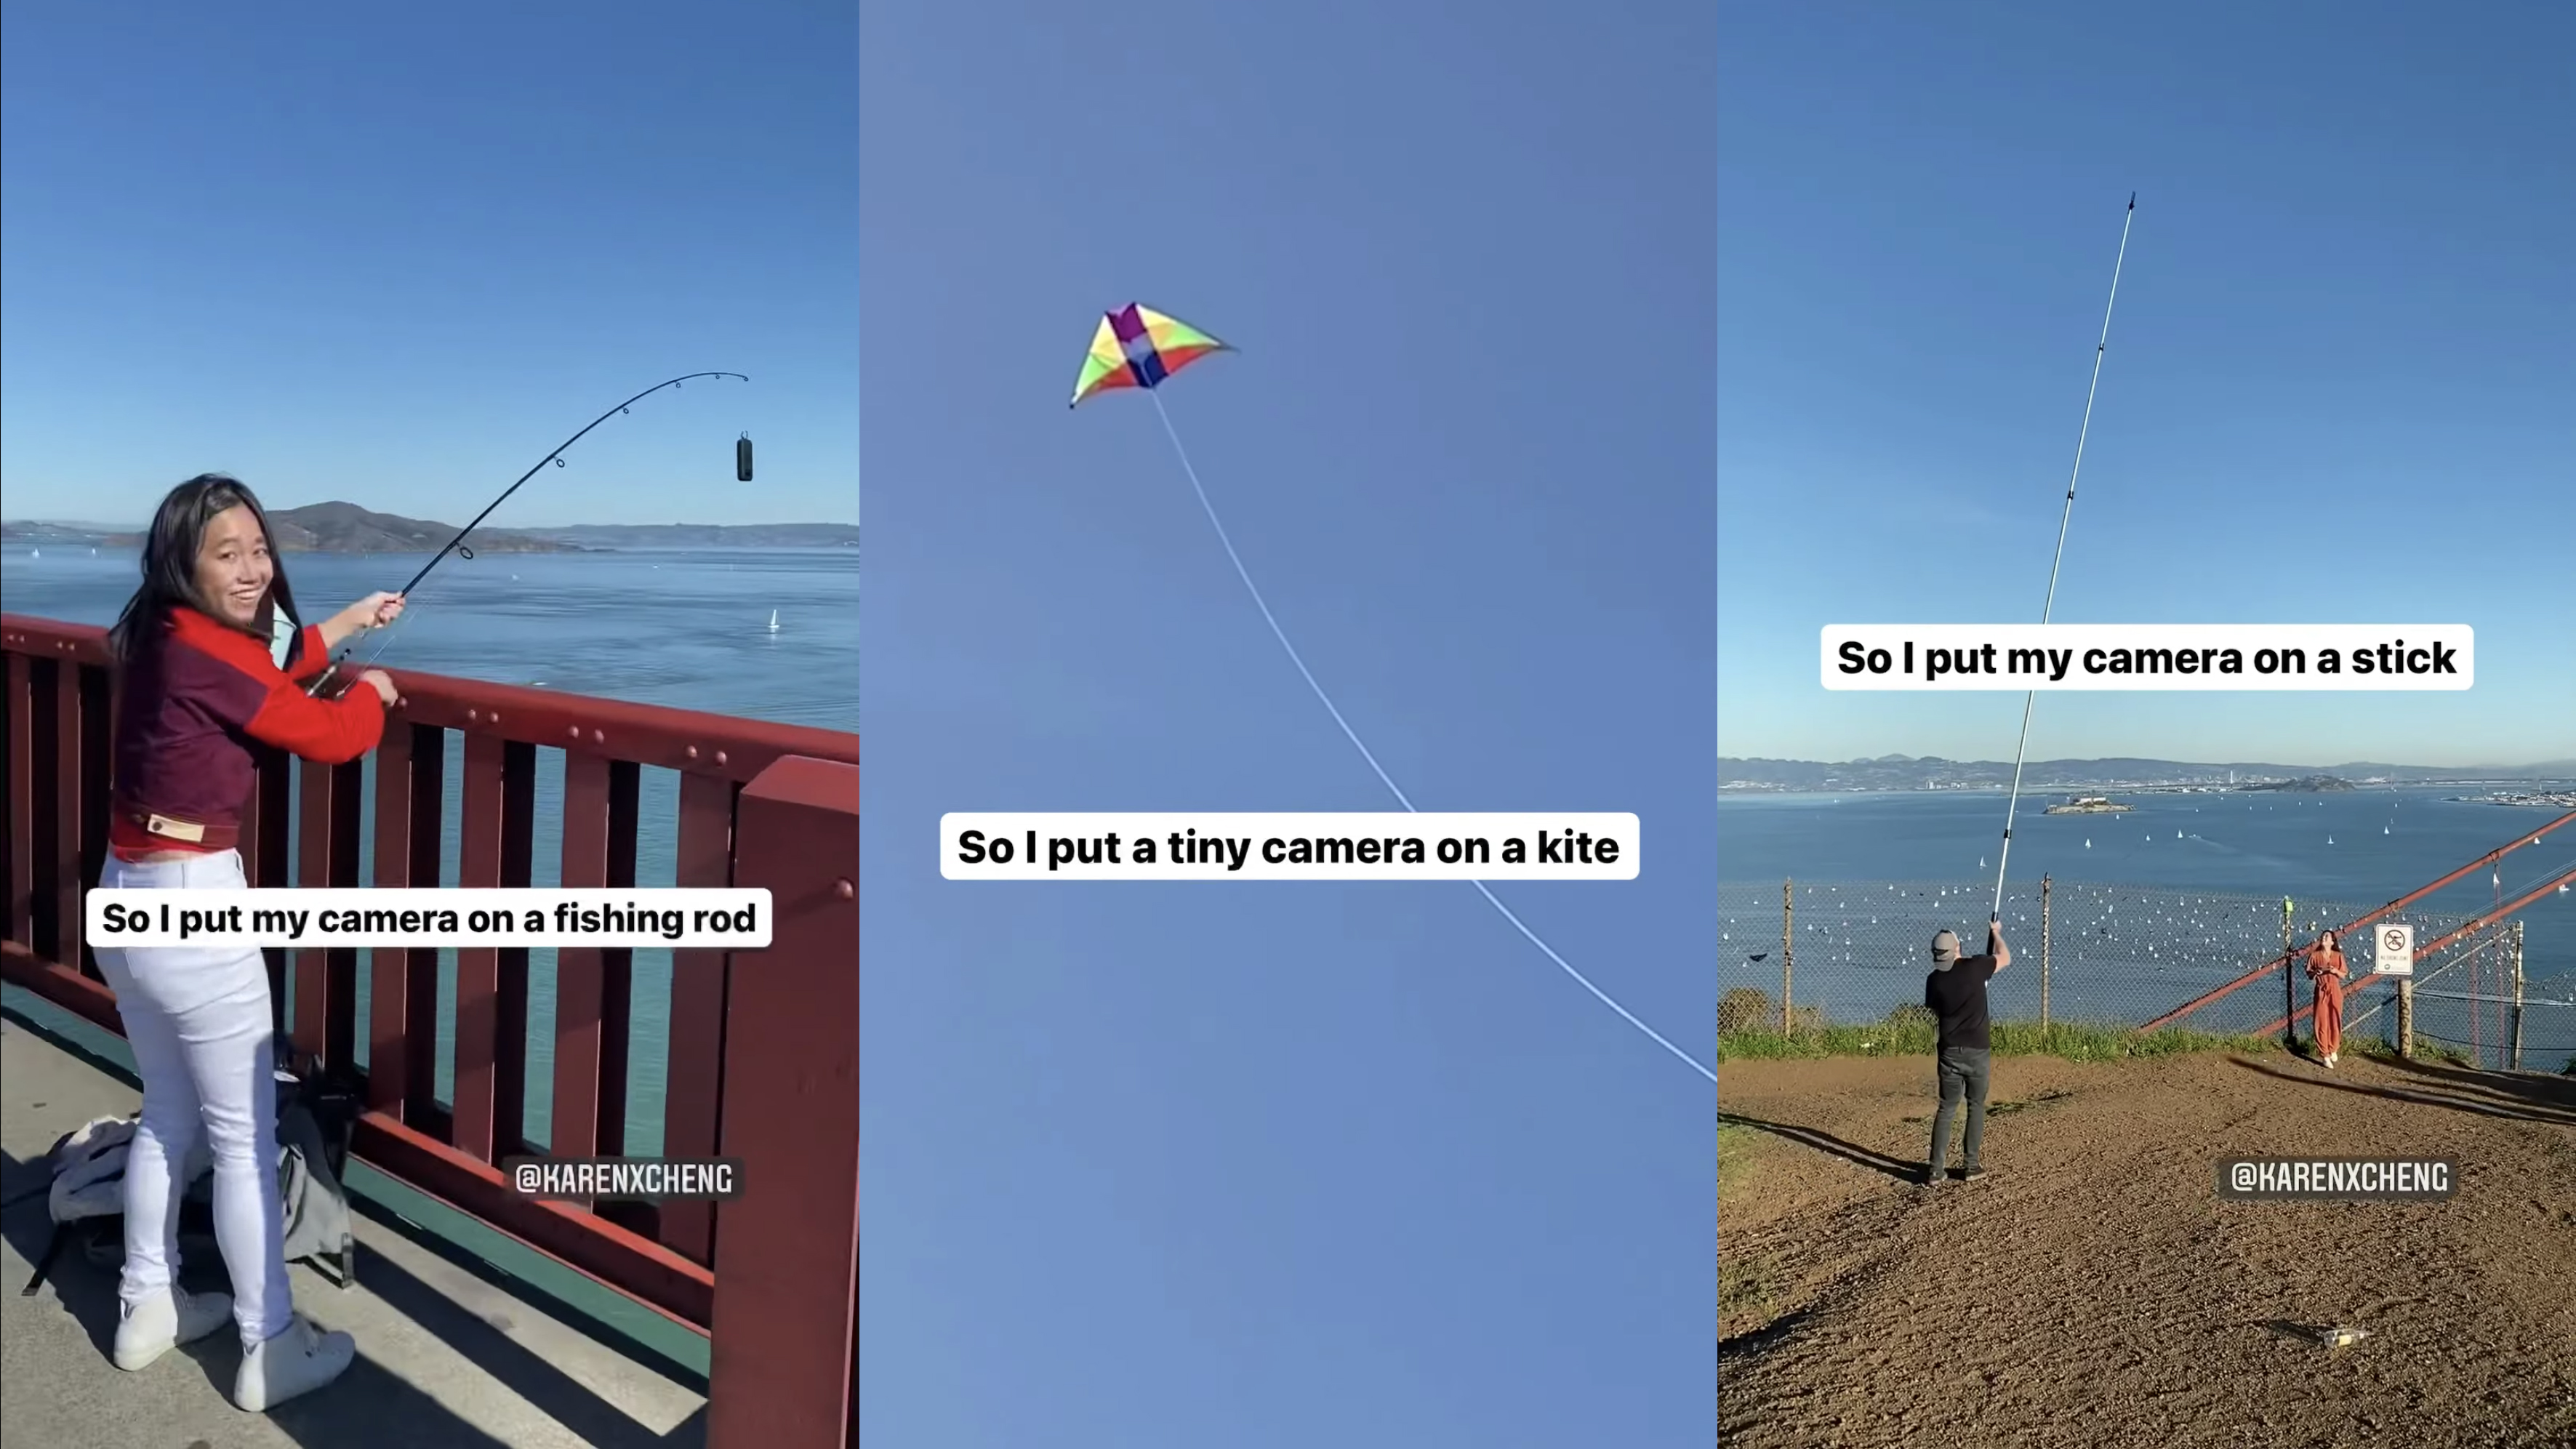 Don't have a drone? Put your camera on a fishing rod! (Or a big stick, or a  kite)